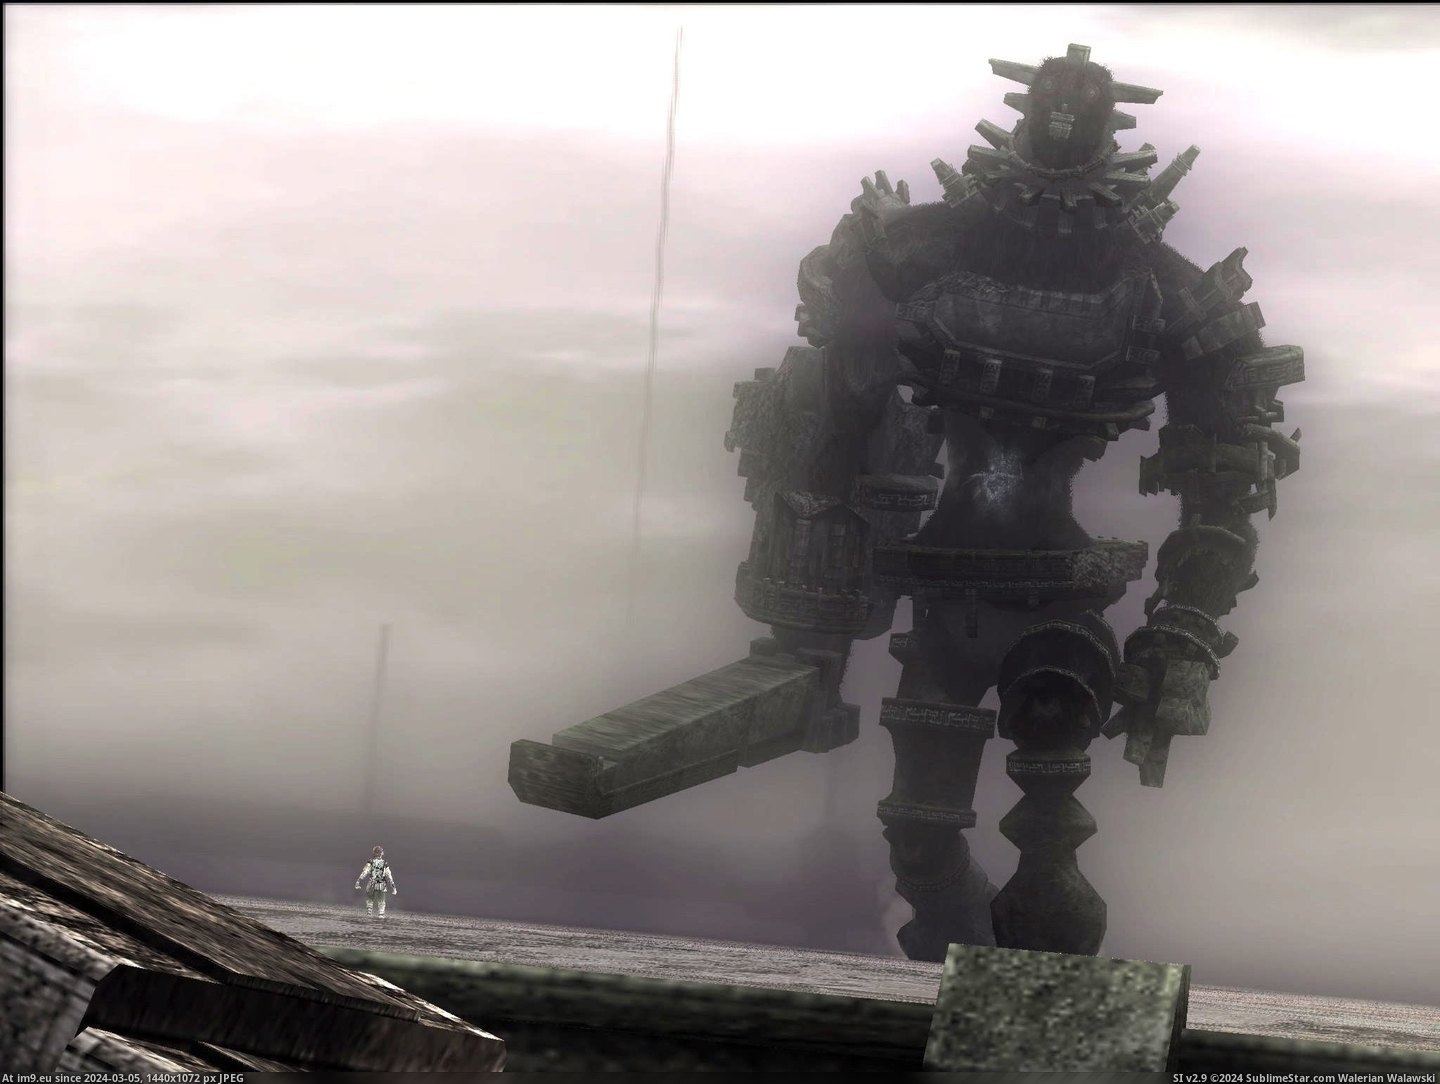 #Game #Shadow #Colossus #Video Video Game Shadow Of The Colossus 5657 Pic. (Image of album Games Wallpapers))